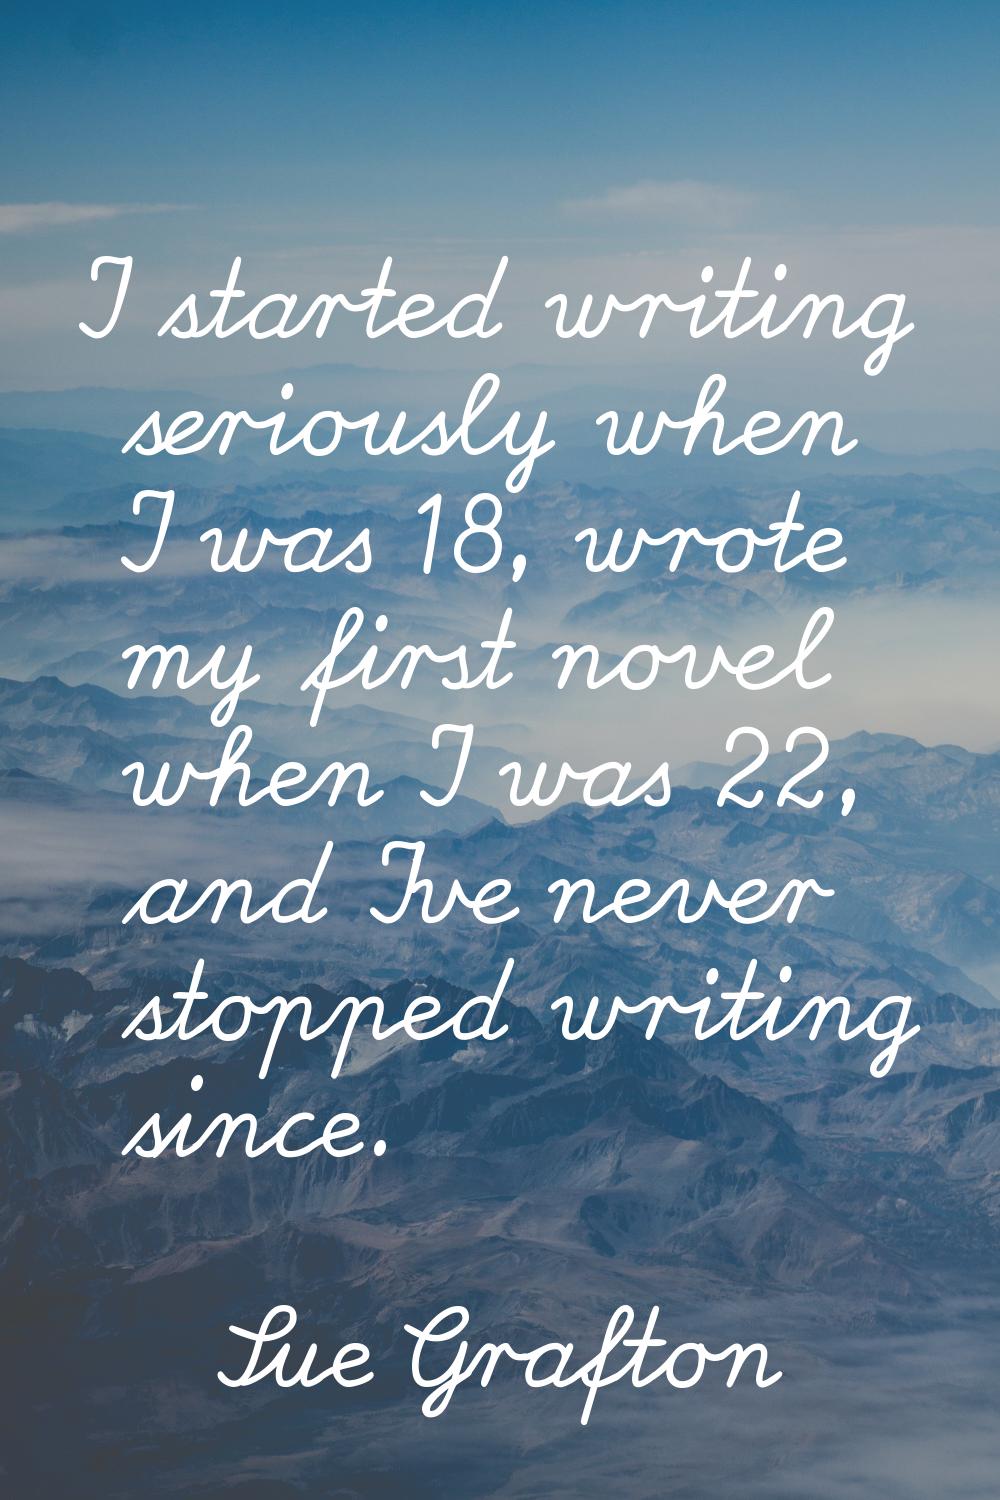 I started writing seriously when I was 18, wrote my first novel when I was 22, and I've never stopp